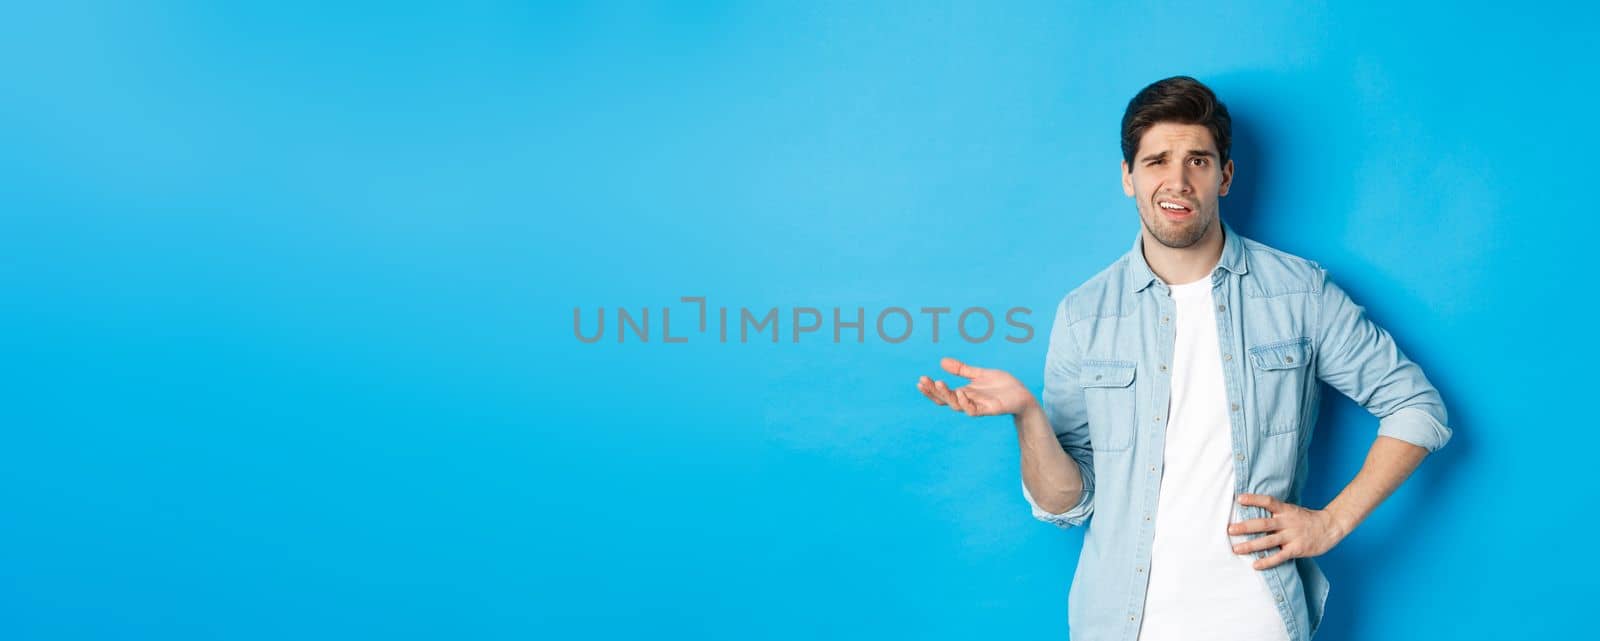 Careless man looking at something disappointing, complaining and judging bad product, standing unamused against blue background.